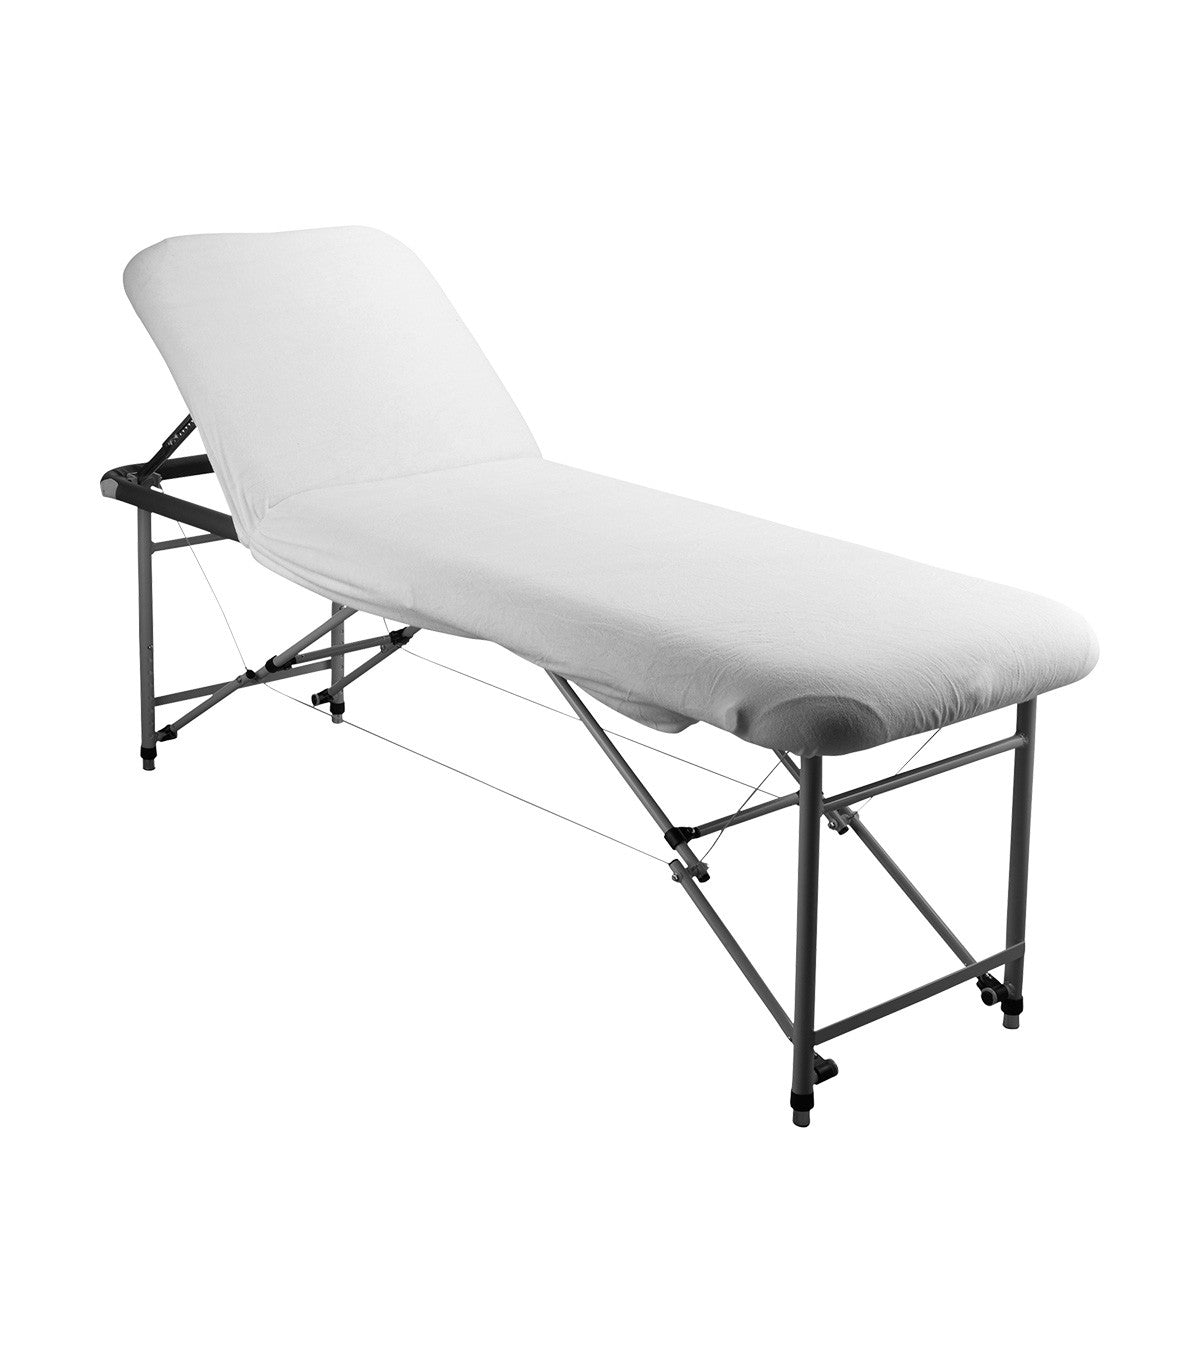 Terry cover for treatment table Ref 160350